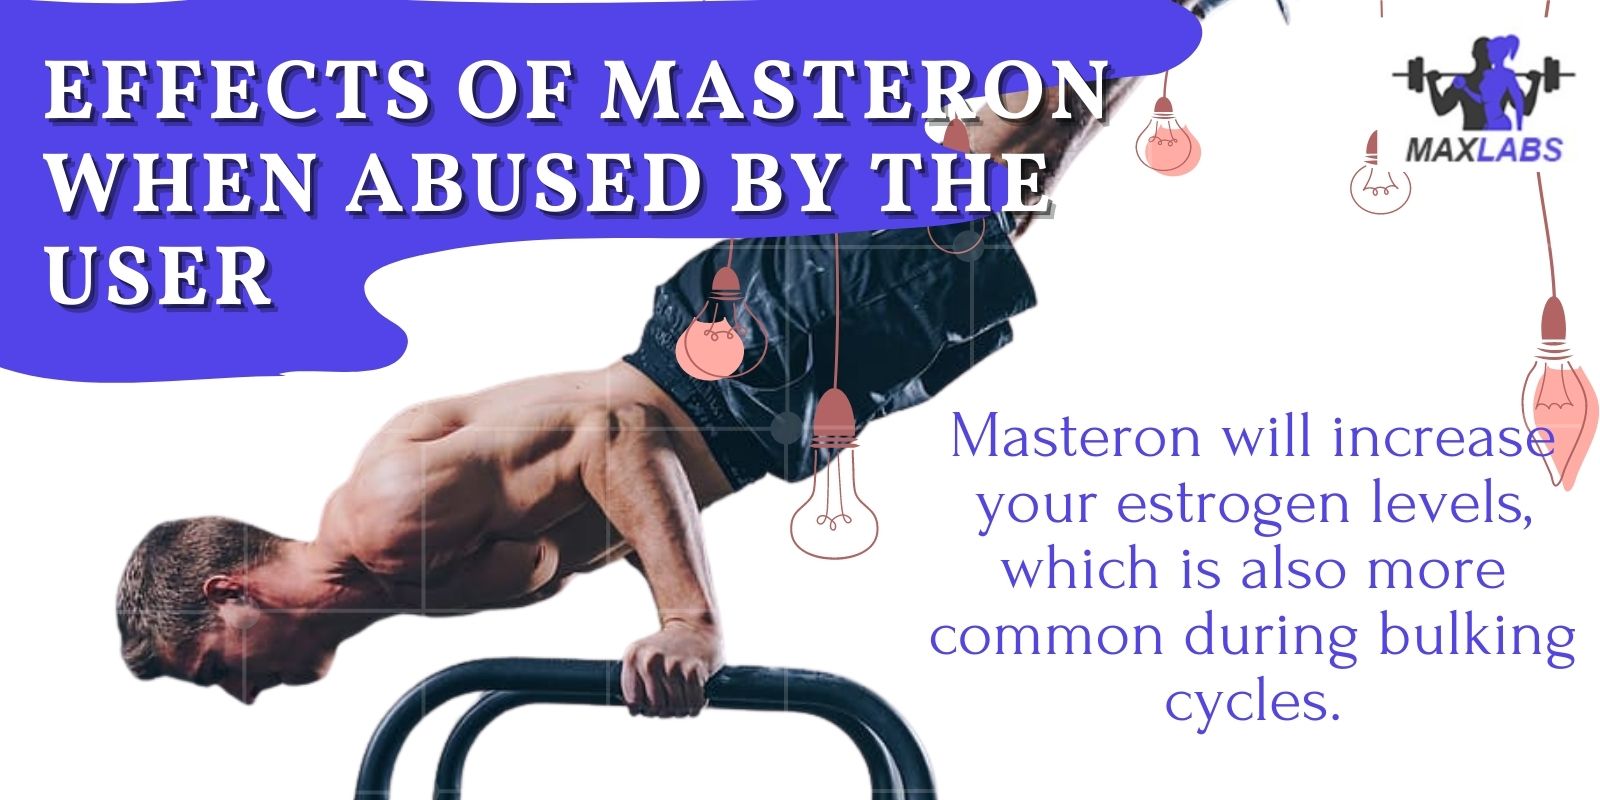 Effects of Masteron when abused by the user